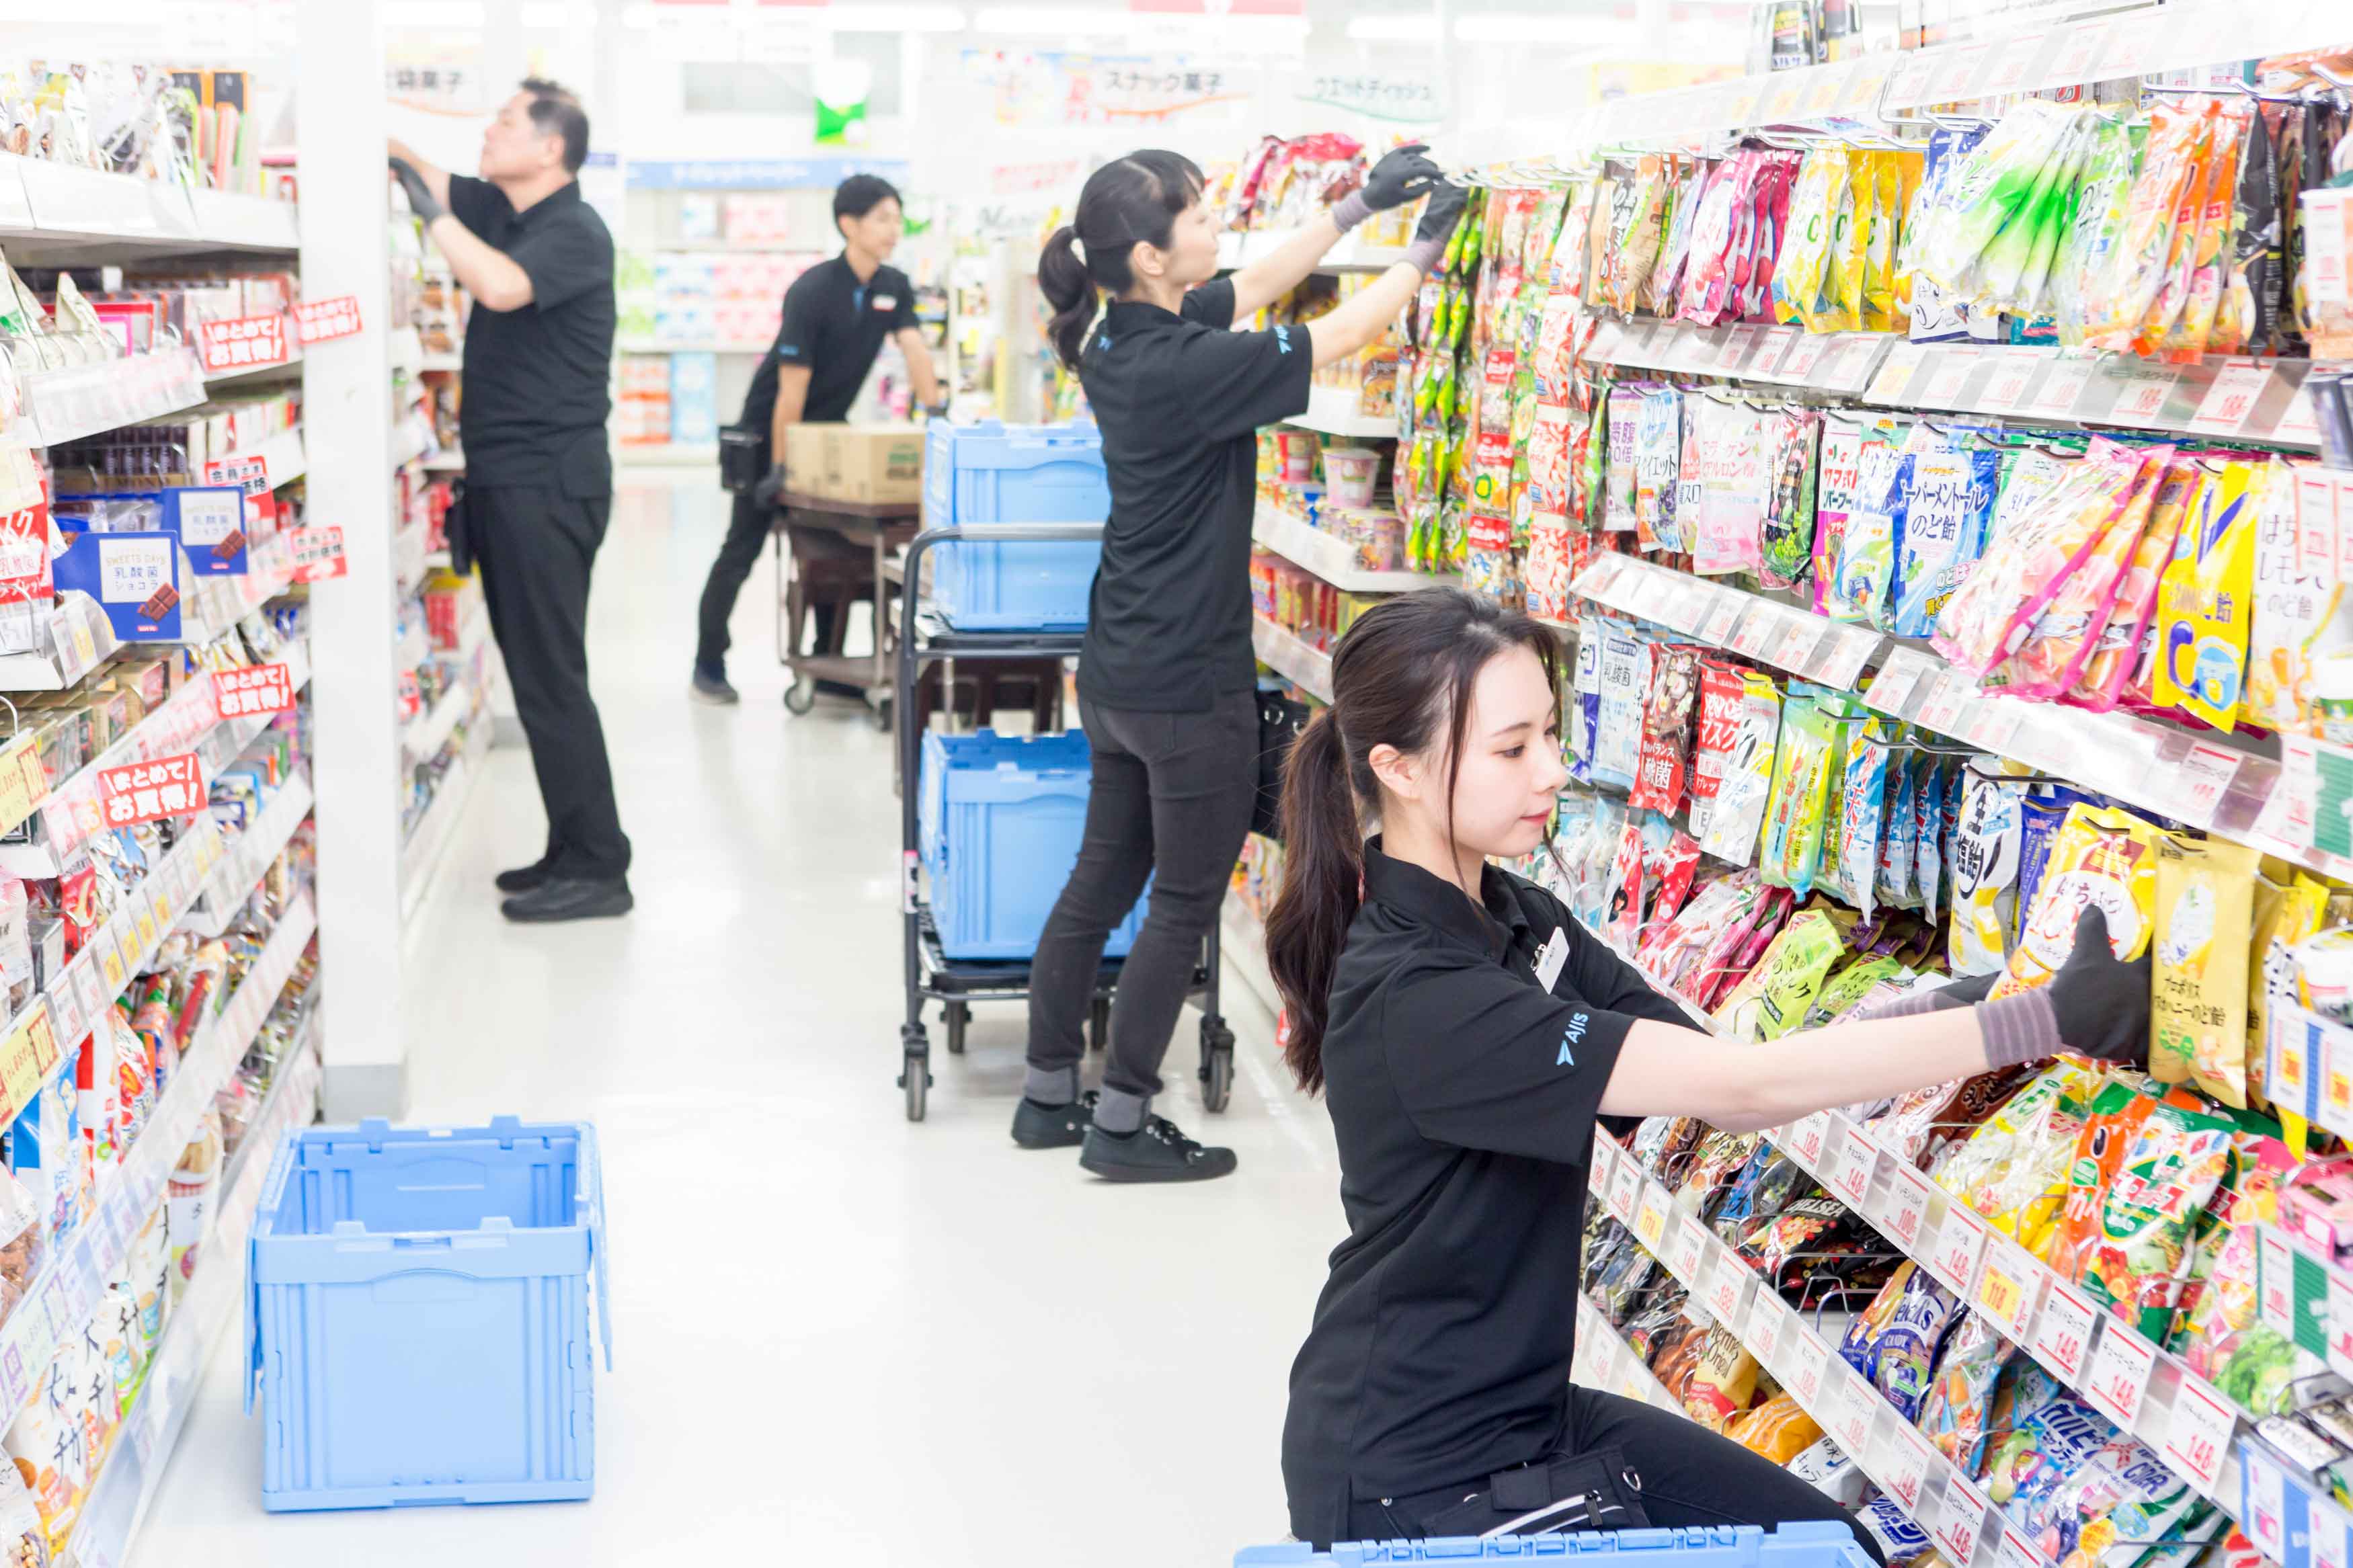 The system automatically analyzes store data, and when a certain category of goods is selling well, it will provide intelligent replenishment prompts based on the inventory situation. The staff can contact the supplier for replenishment or transfer goods between stores according to demand.